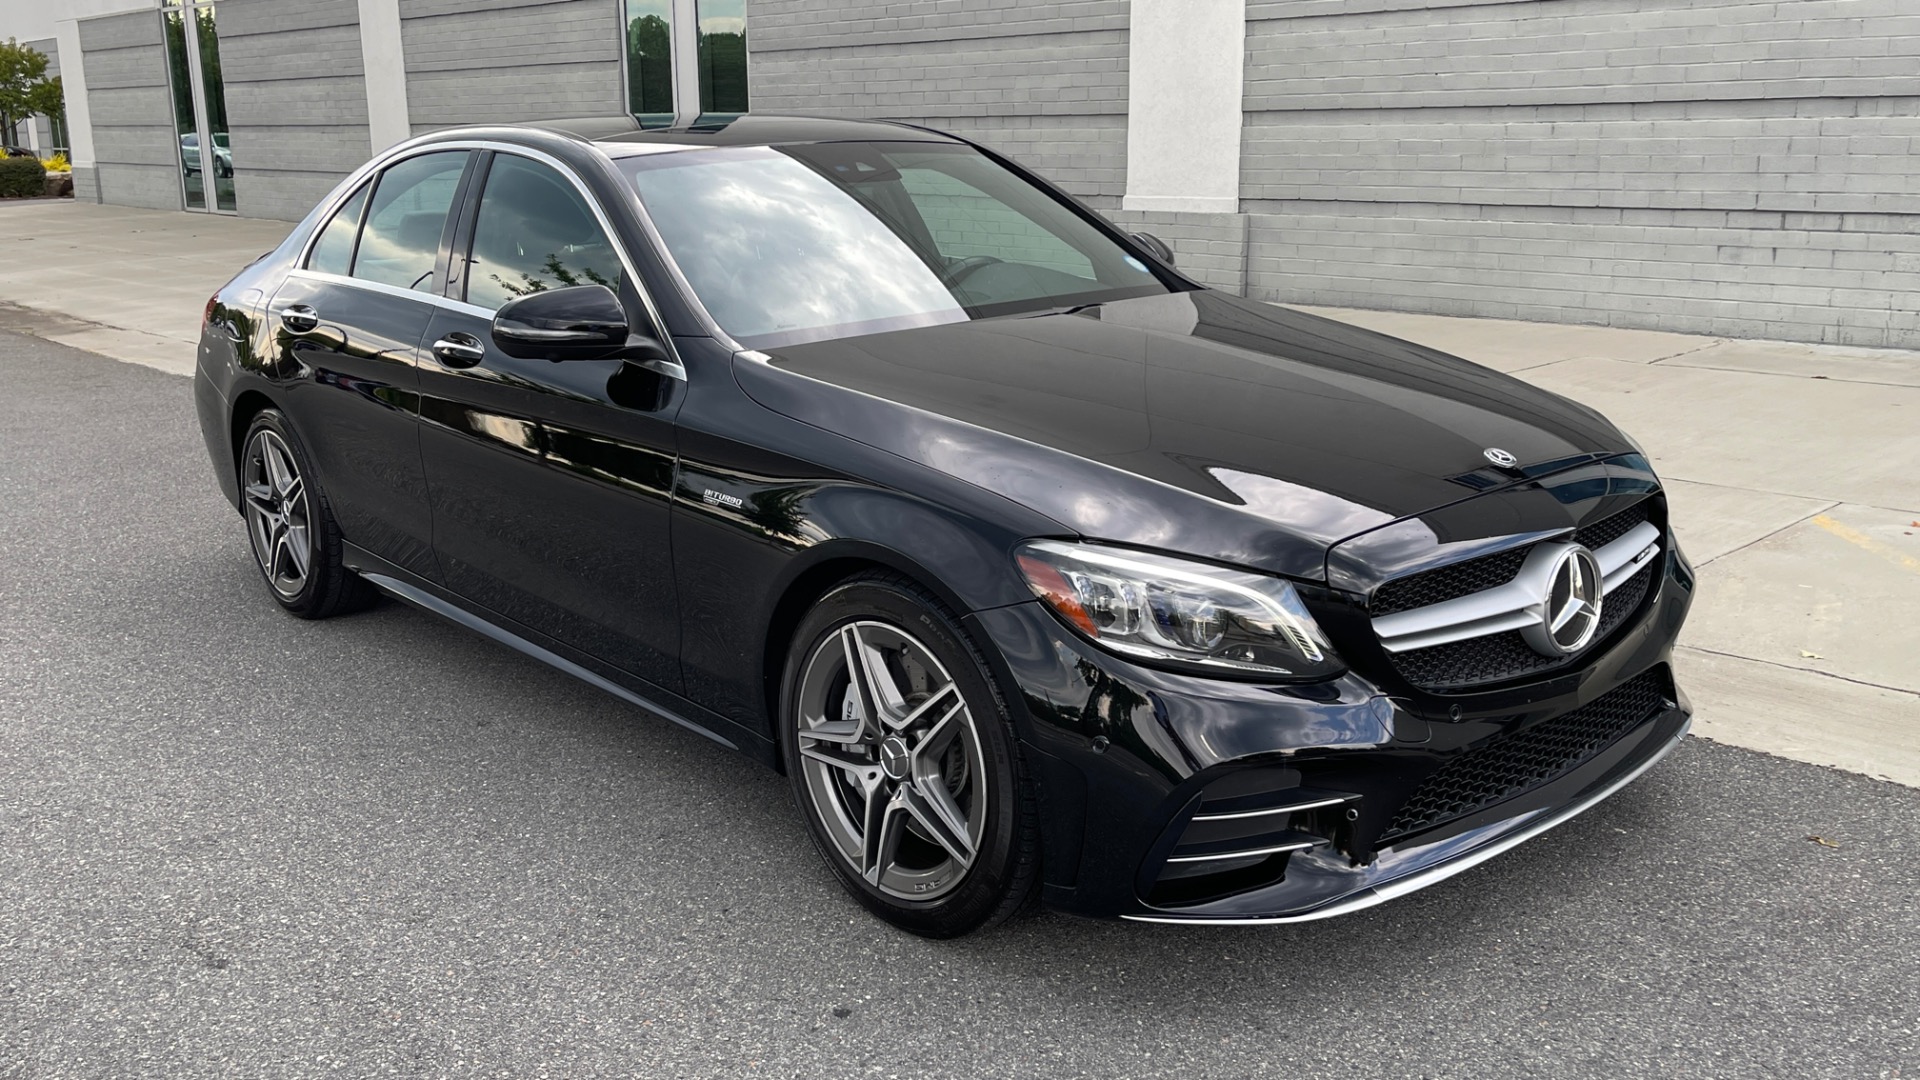 Used 2020 Mercedes-Benz C-CLASS AMG C43 4MATIC / PARK ASST / PANO-ROOF / LIGHTING / REARVIEW for sale $60,595 at Formula Imports in Charlotte NC 28227 5